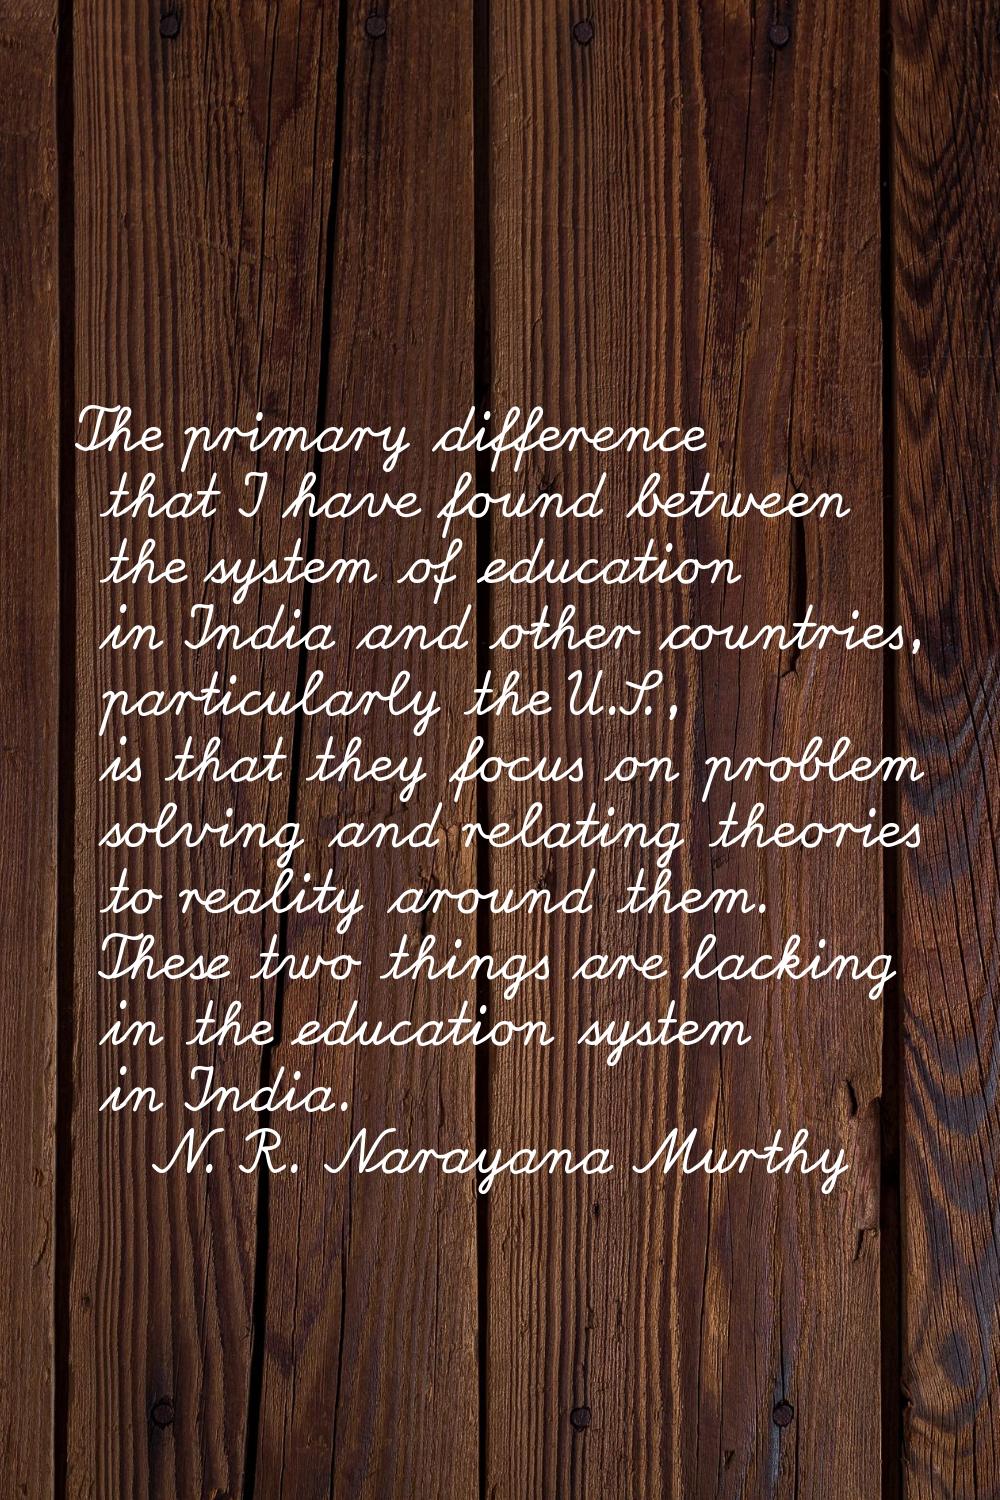 The primary difference that I have found between the system of education in India and other countri